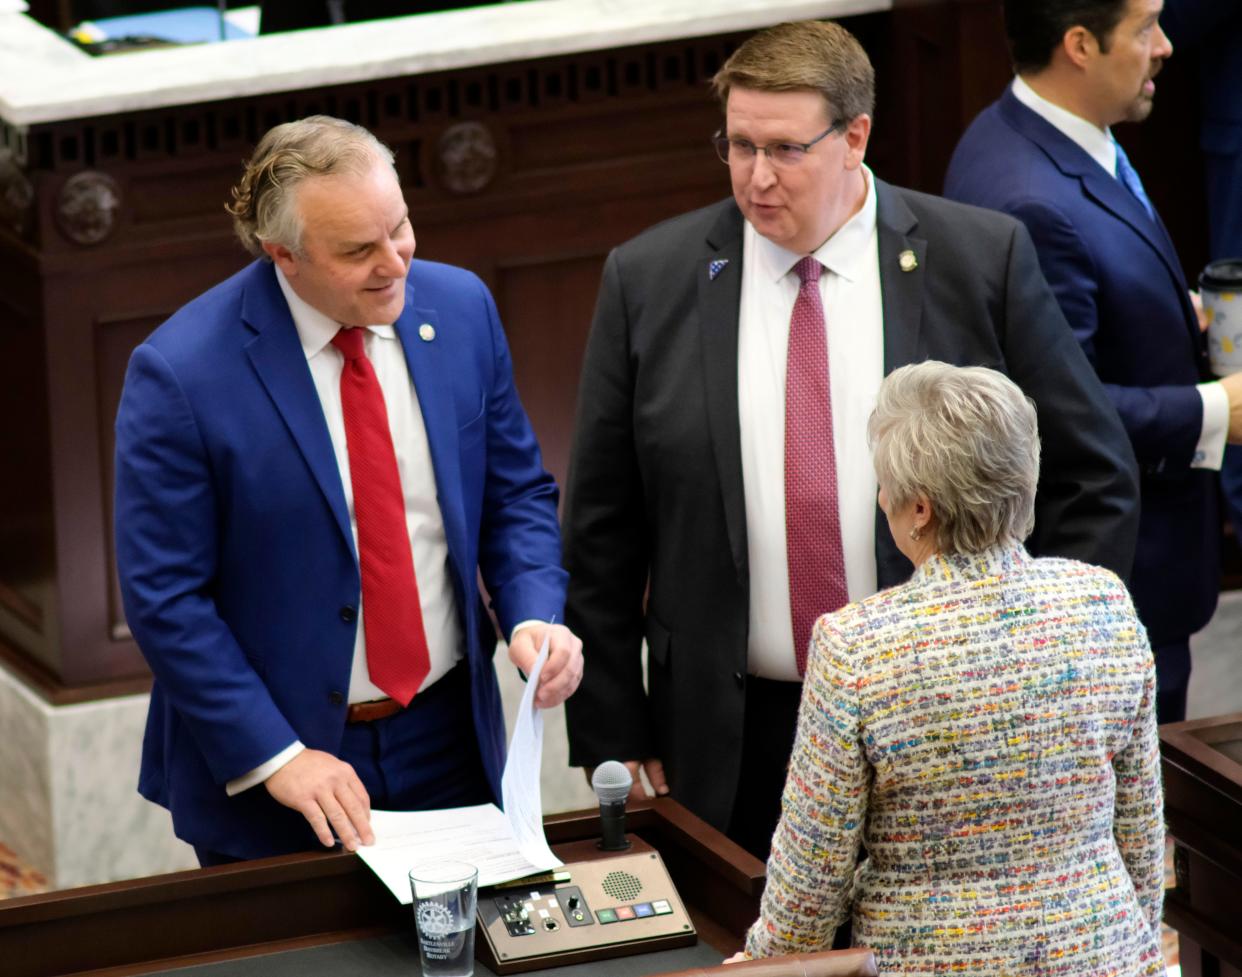 Senate President Pro Tempore Greg Treat, left, and Majority Floor Leader Greg McCortney talk with Sen. Julie Daniels, assistant majority whip of the Senate, in 2023 before the session at the start of the 59th Oklahoma Legislature at the state Capitol.